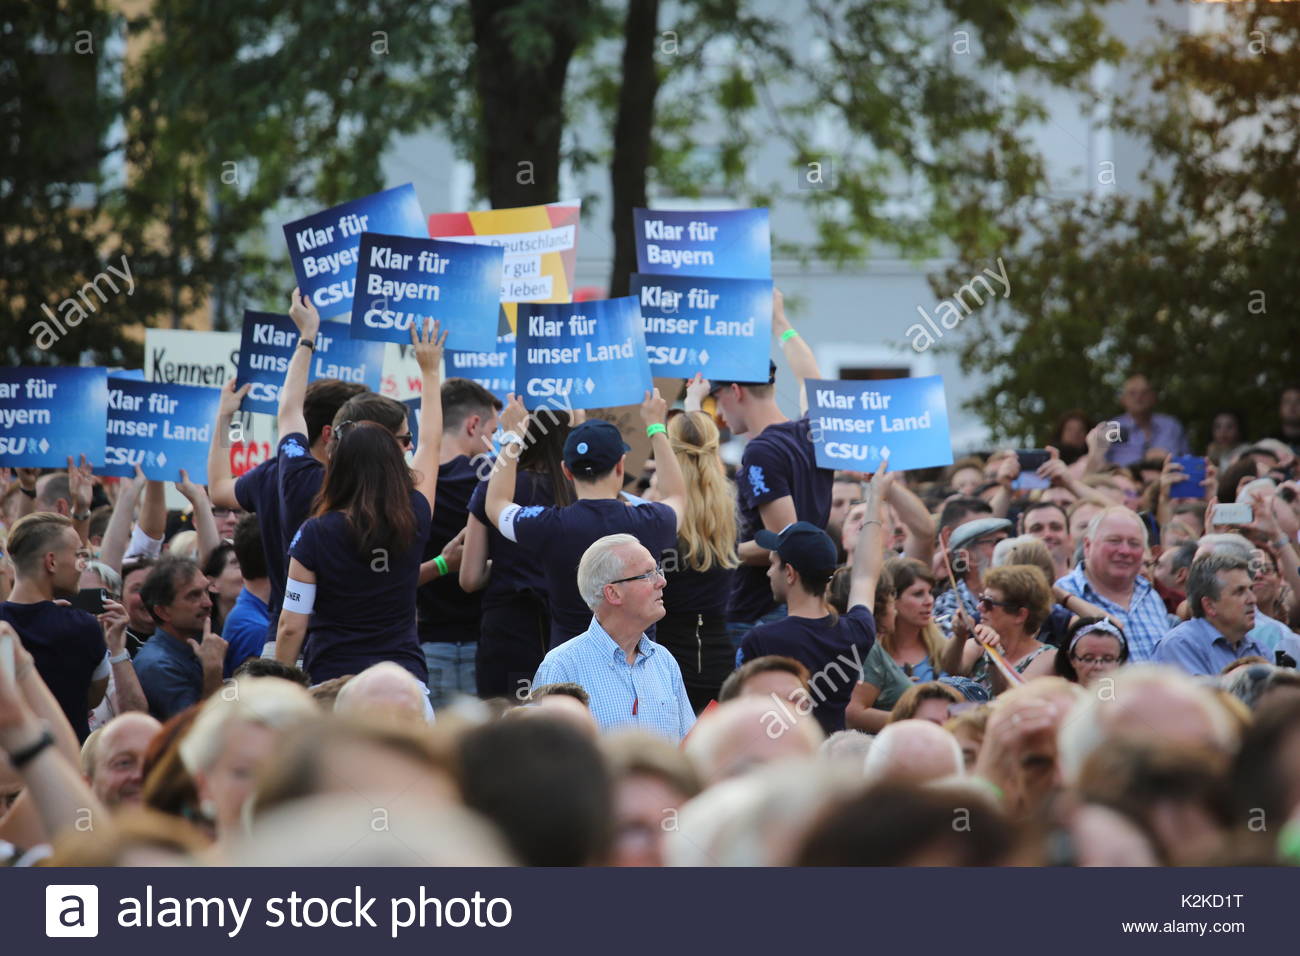 Erlangen, Germany. 30th Aug, 2017. A crowd of CSU supporters raise their placards in support of Angela Merkel at an event in Erlangen. Credit: reallifephotos/Alamy Live News Stock Photo